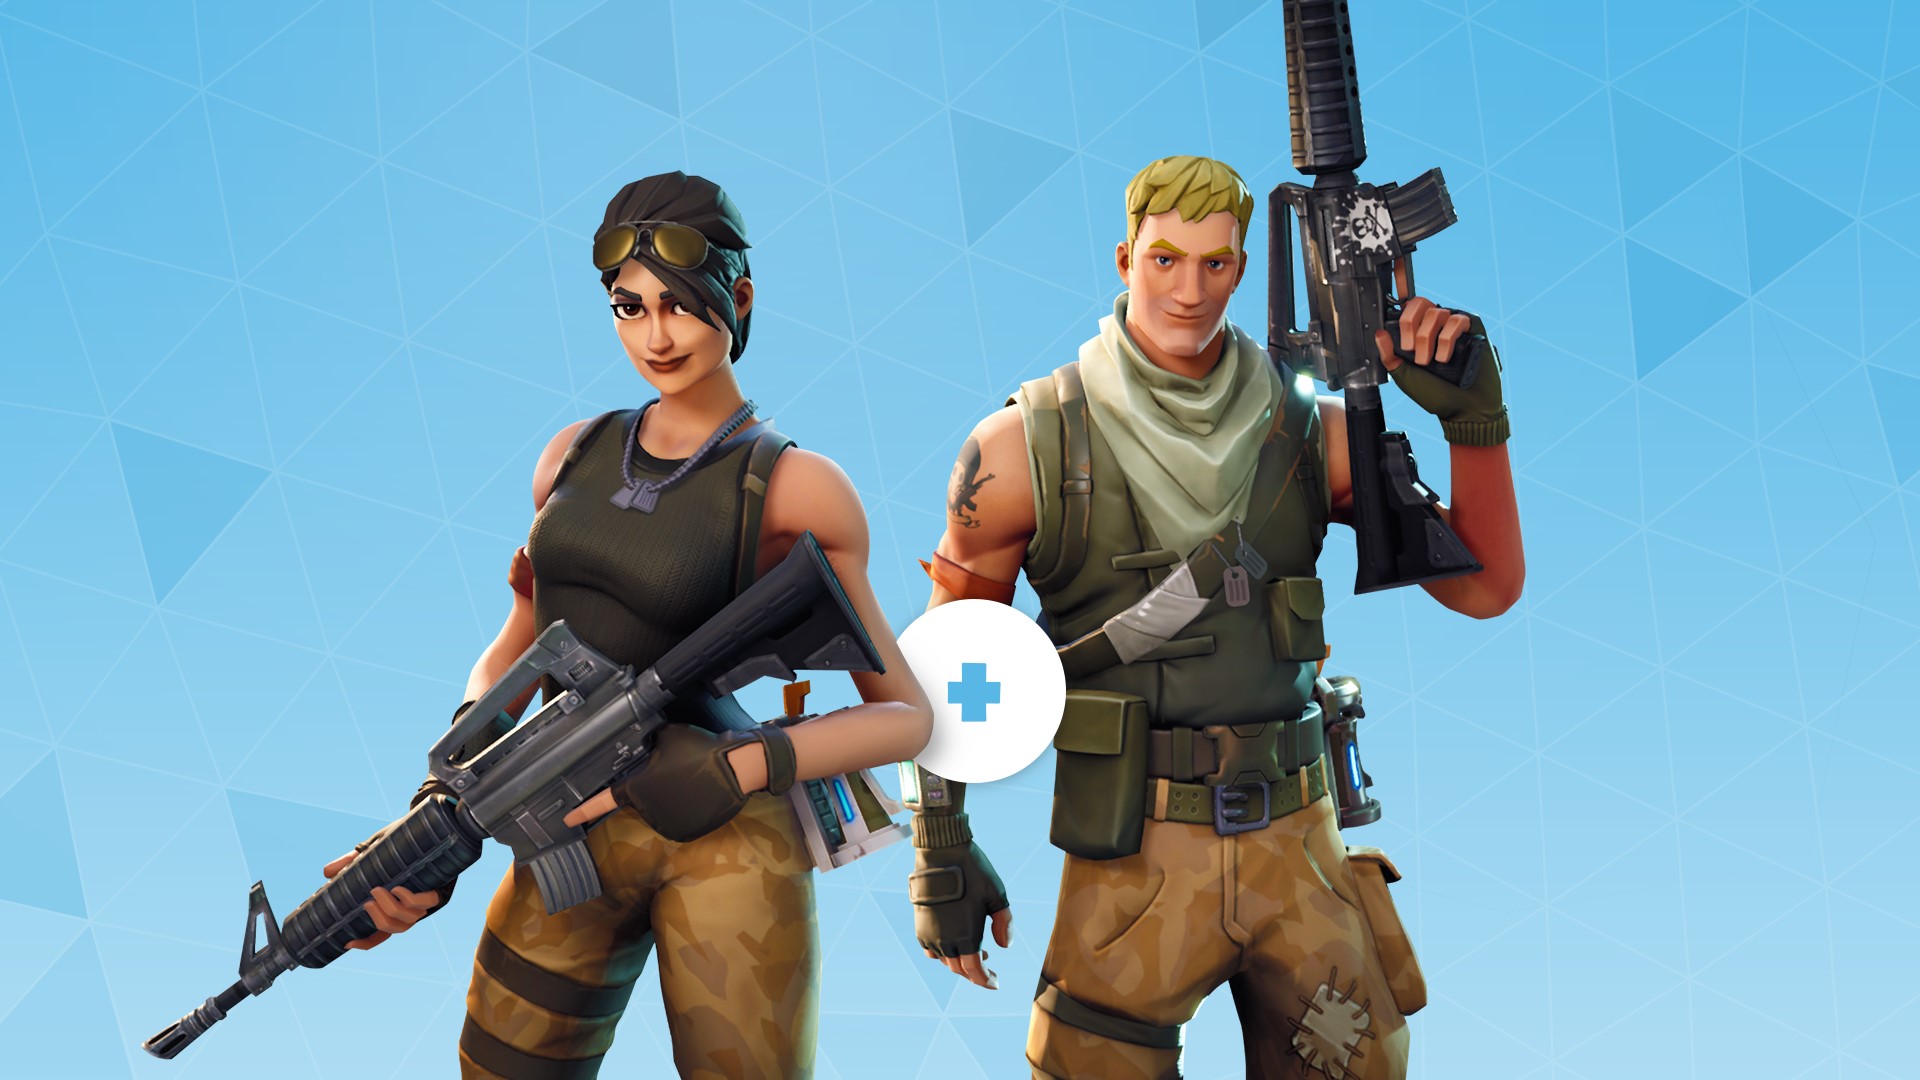 Fortnite: How to Play Split-Screen on Xbox One and PlayStation 4